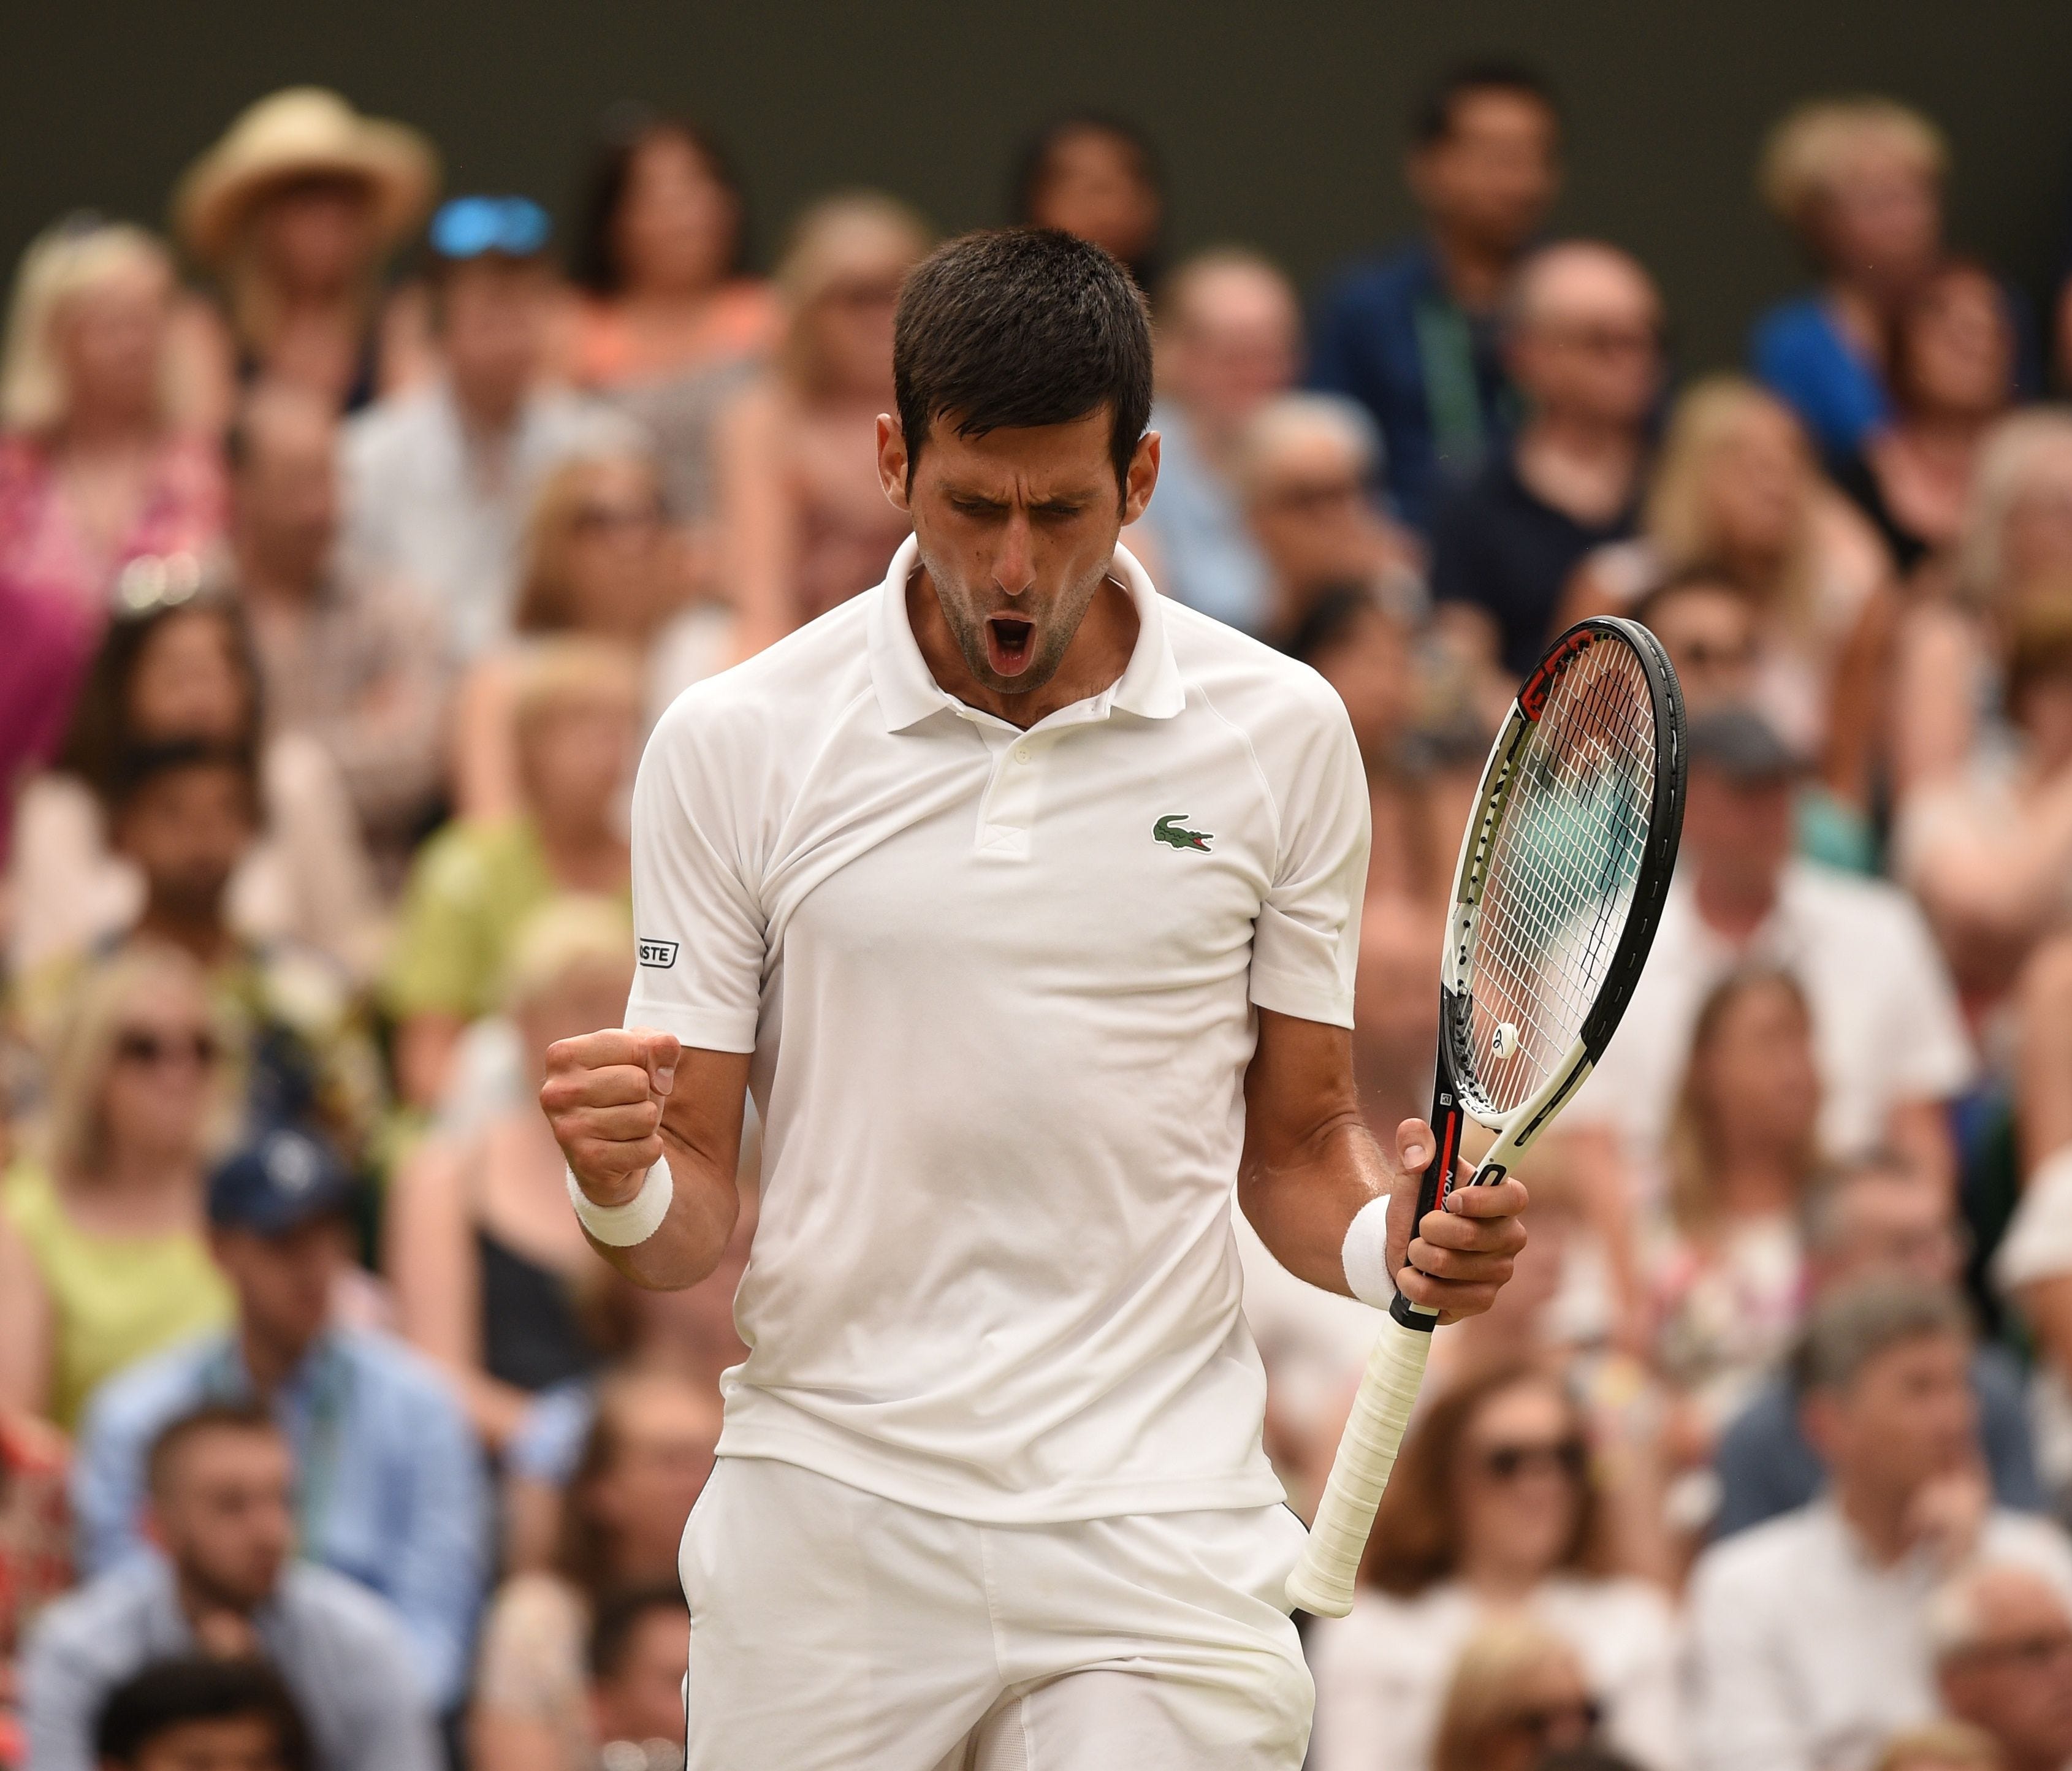 Serbia's Novak Djokovic reacts in the fifth set against Spain's Rafael Nadal during the continuation of their men's singles semifinal match during the 2018 Wimbledon Championships on July 14.